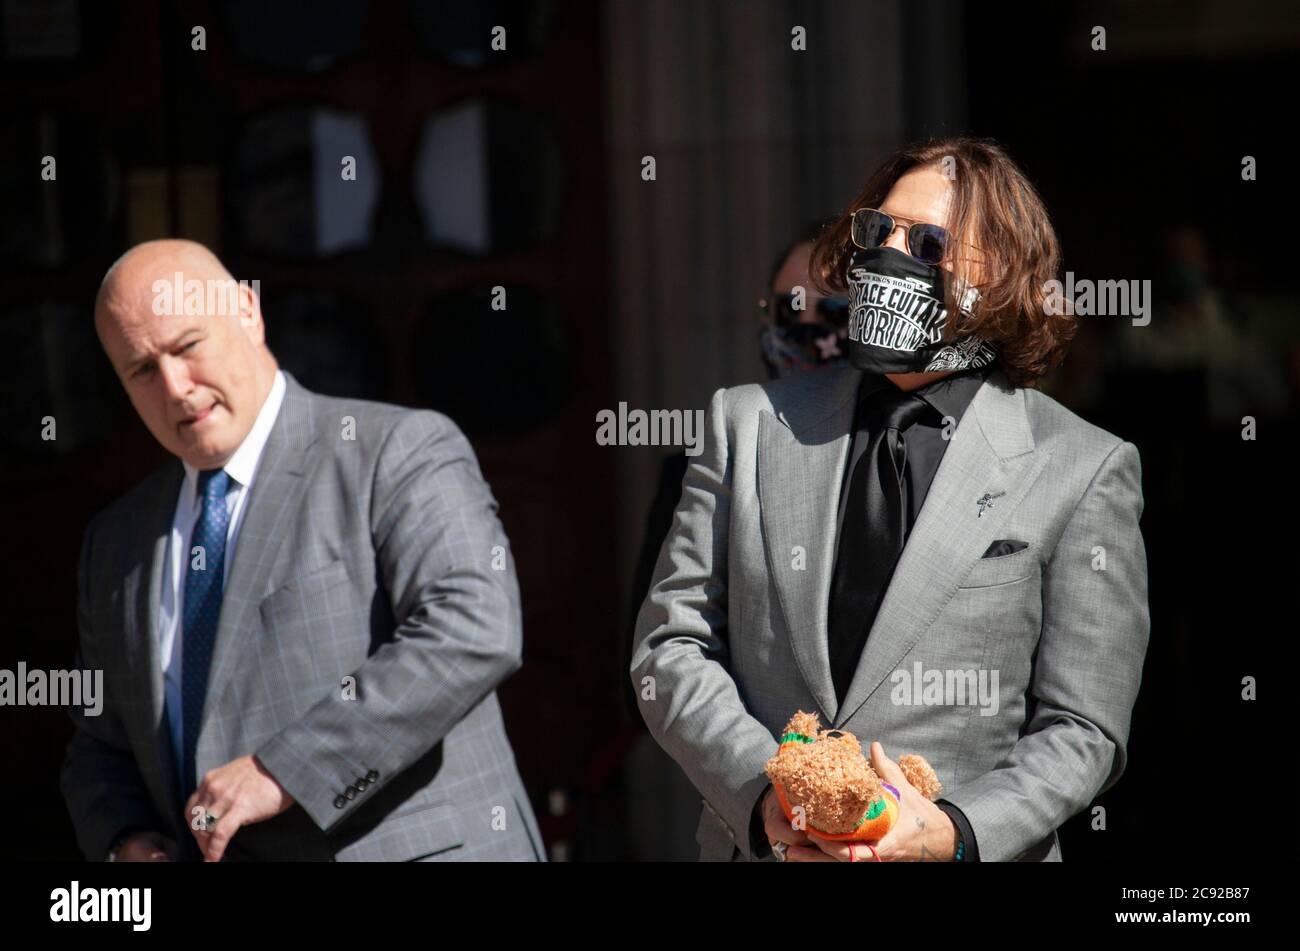 London, UK. 28th July 2020. Hollywood actor and musician, Johnny Depp, arrives at the high court, wearing a face scarf and holding a teddy bear, on day 16 of his libel trial against The Sun's publishers NGN. Credit: Neil Atkinson/Alamy Live News Stock Photo